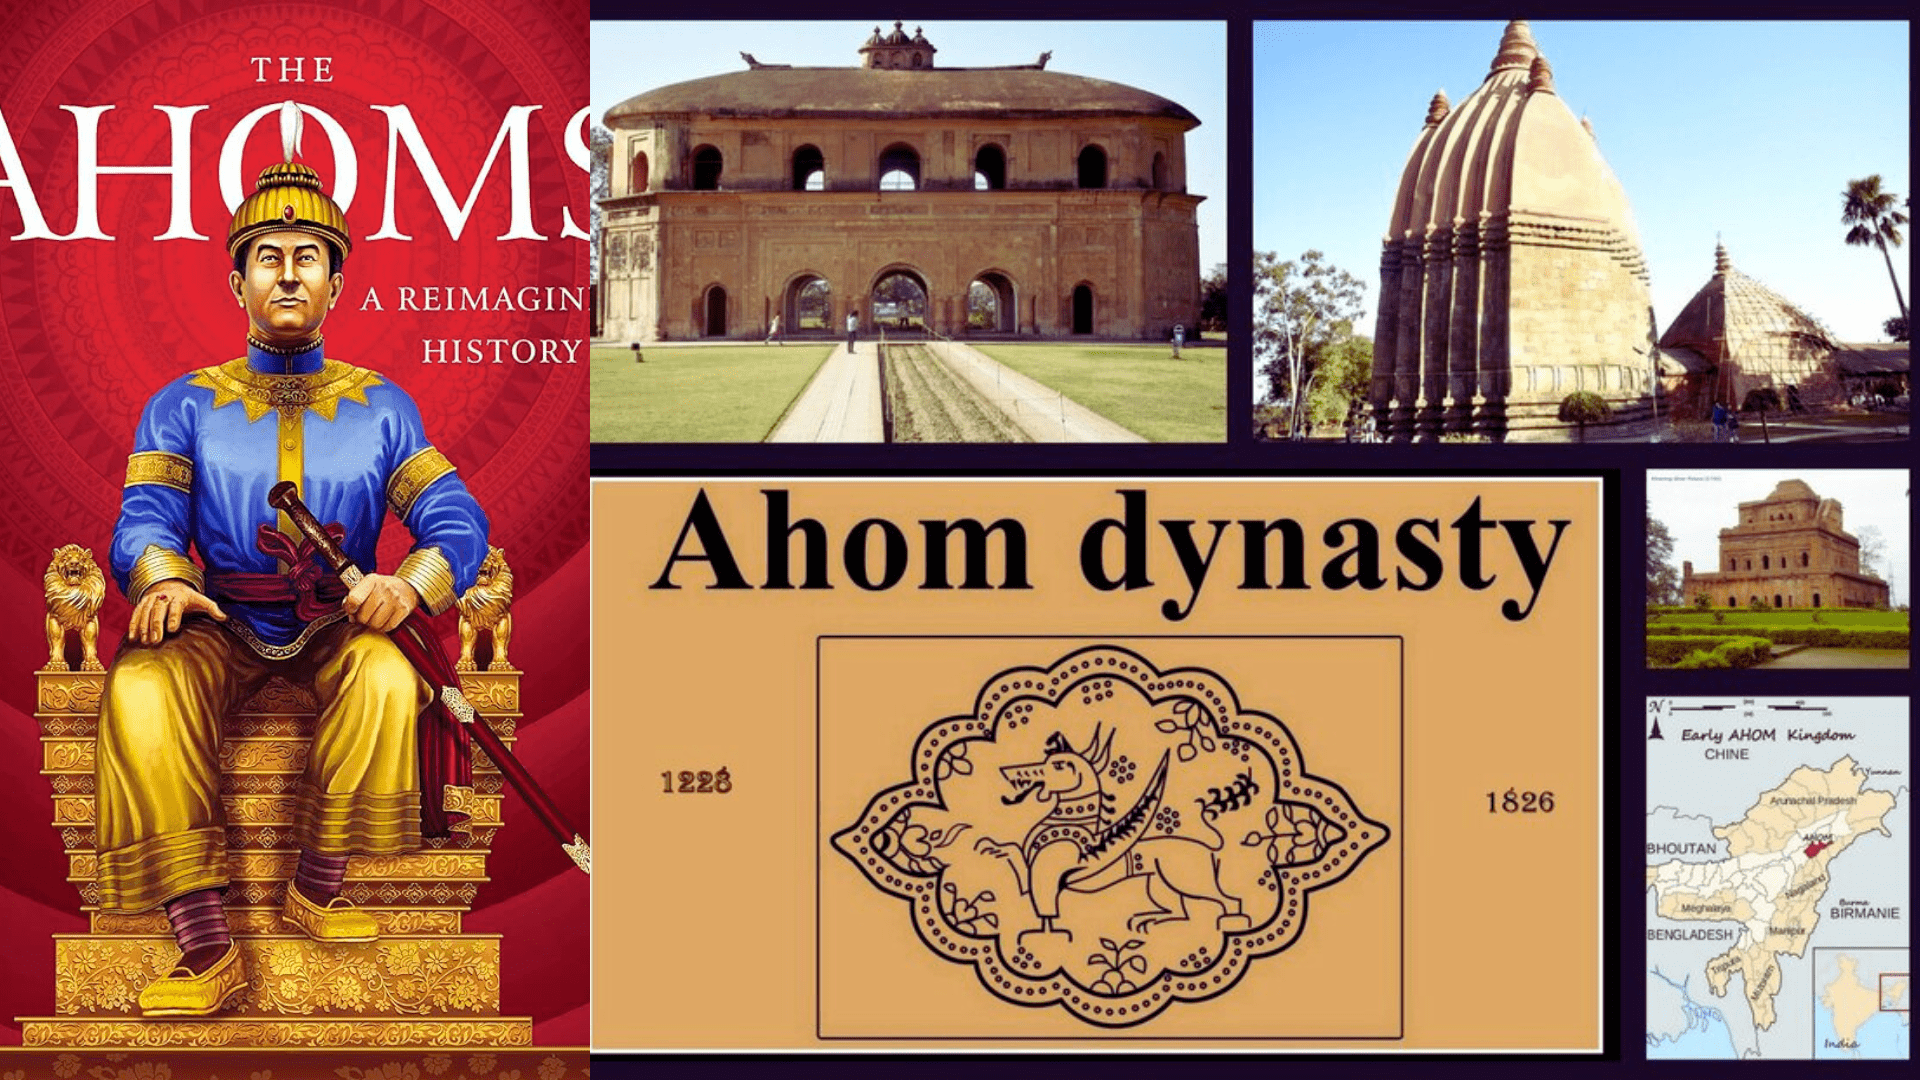 Who Is the Founder of the Ahom Dynasty